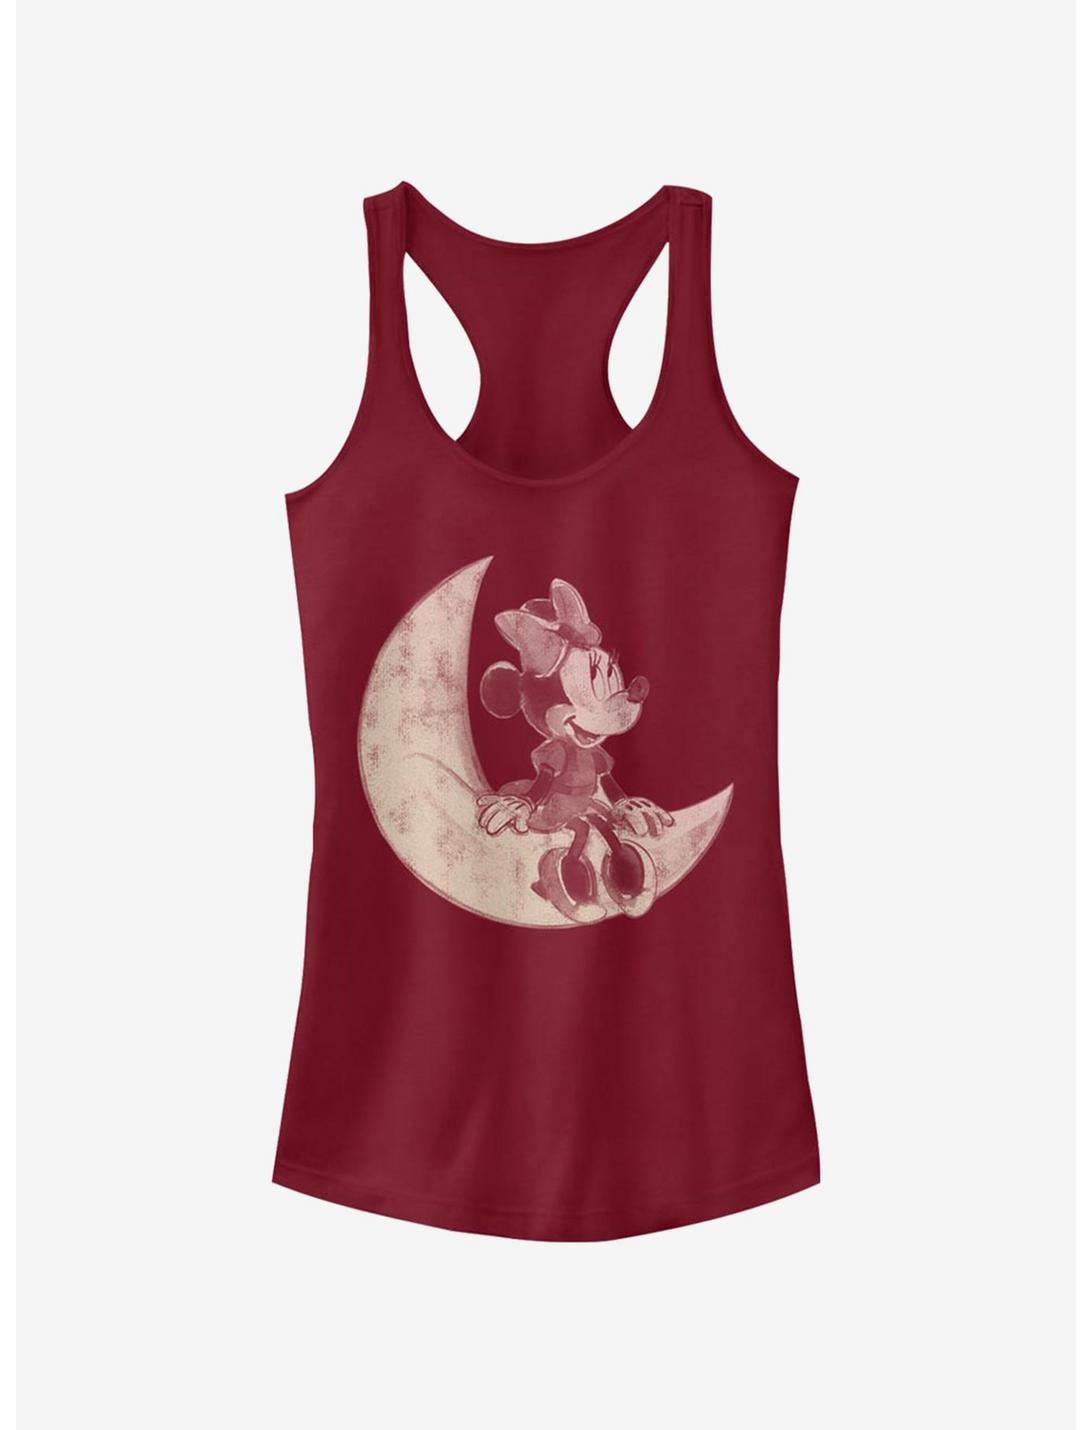 Disney Mickey Mouse Minnie On The Moon Girls Tank, SCARLET, hi-res